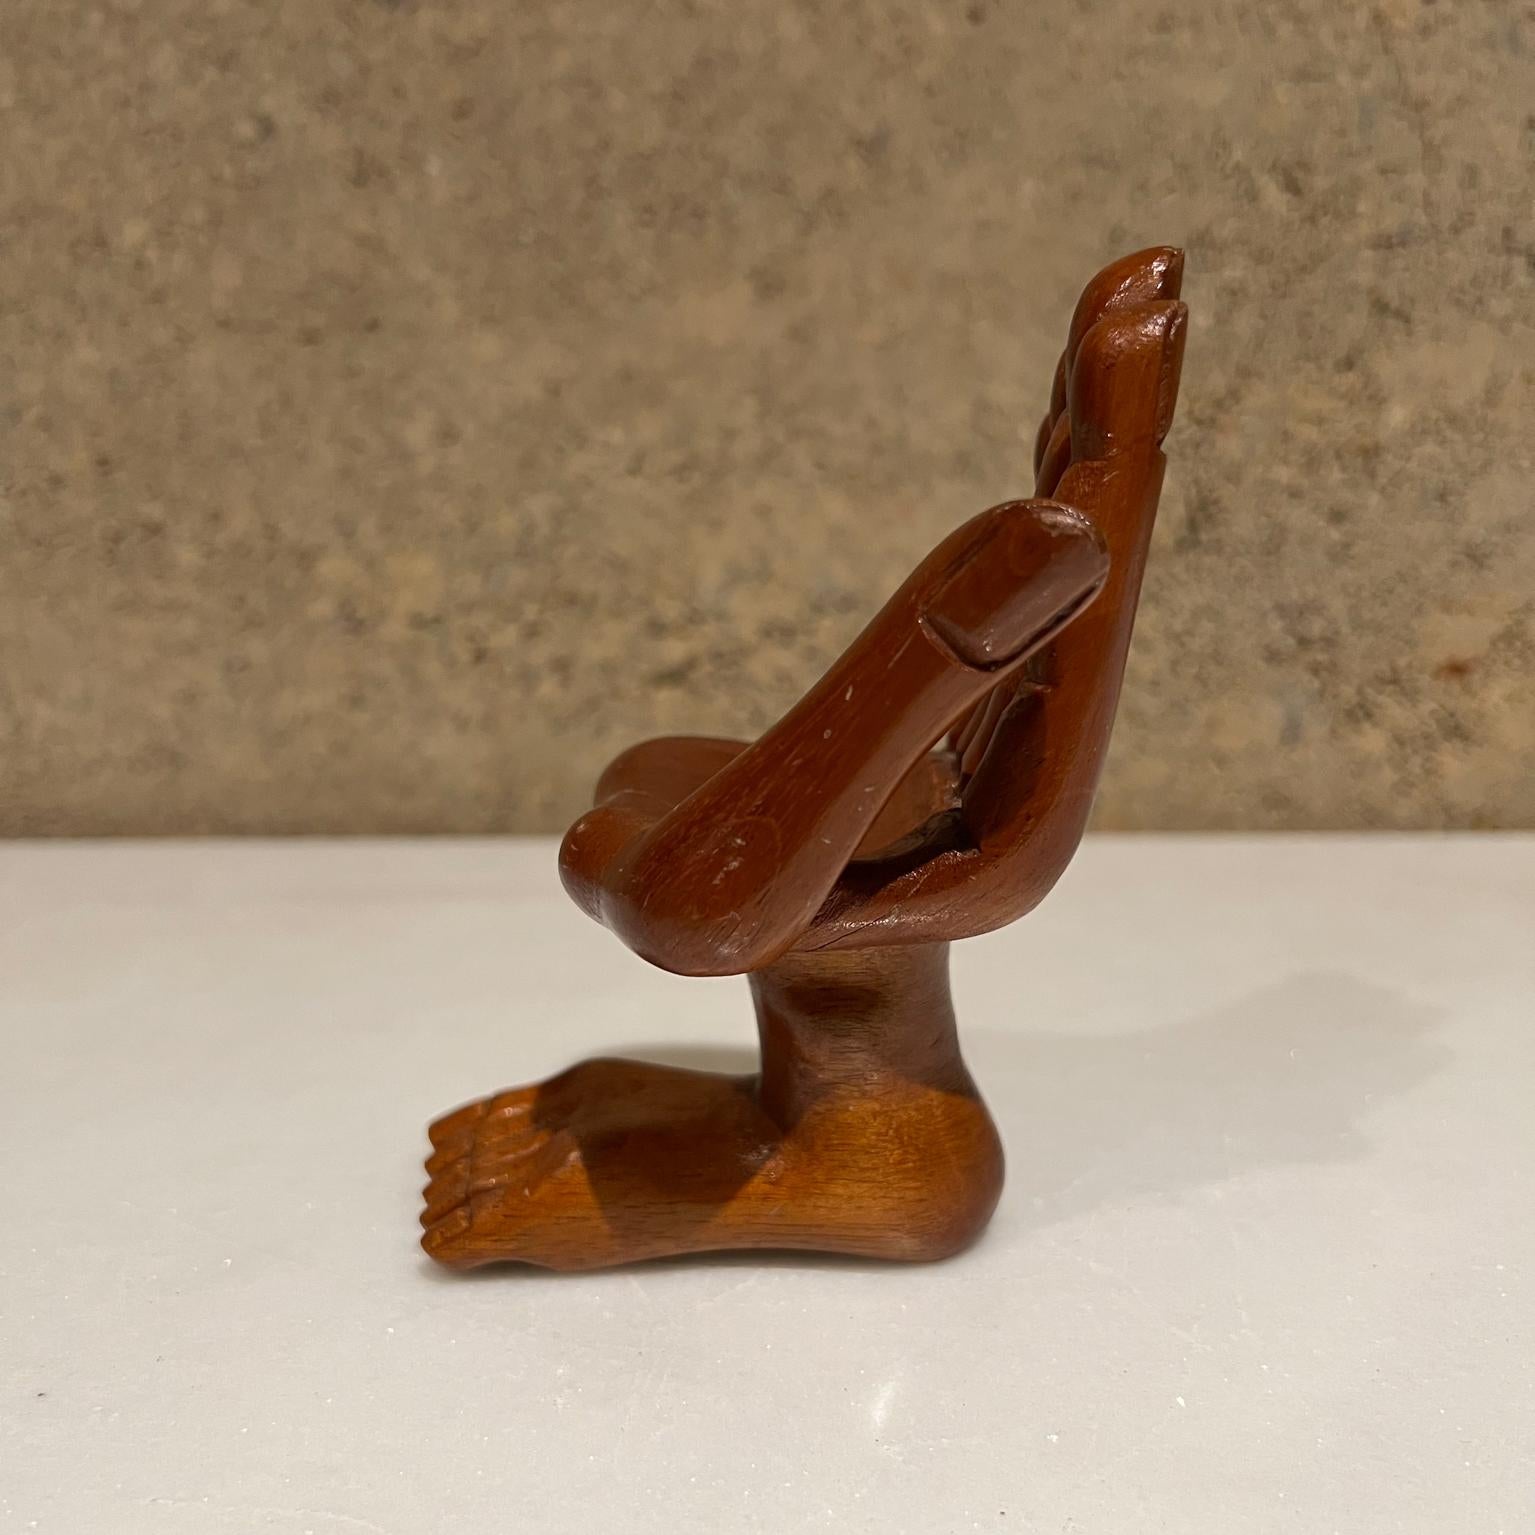 wooden hand chair with fingers